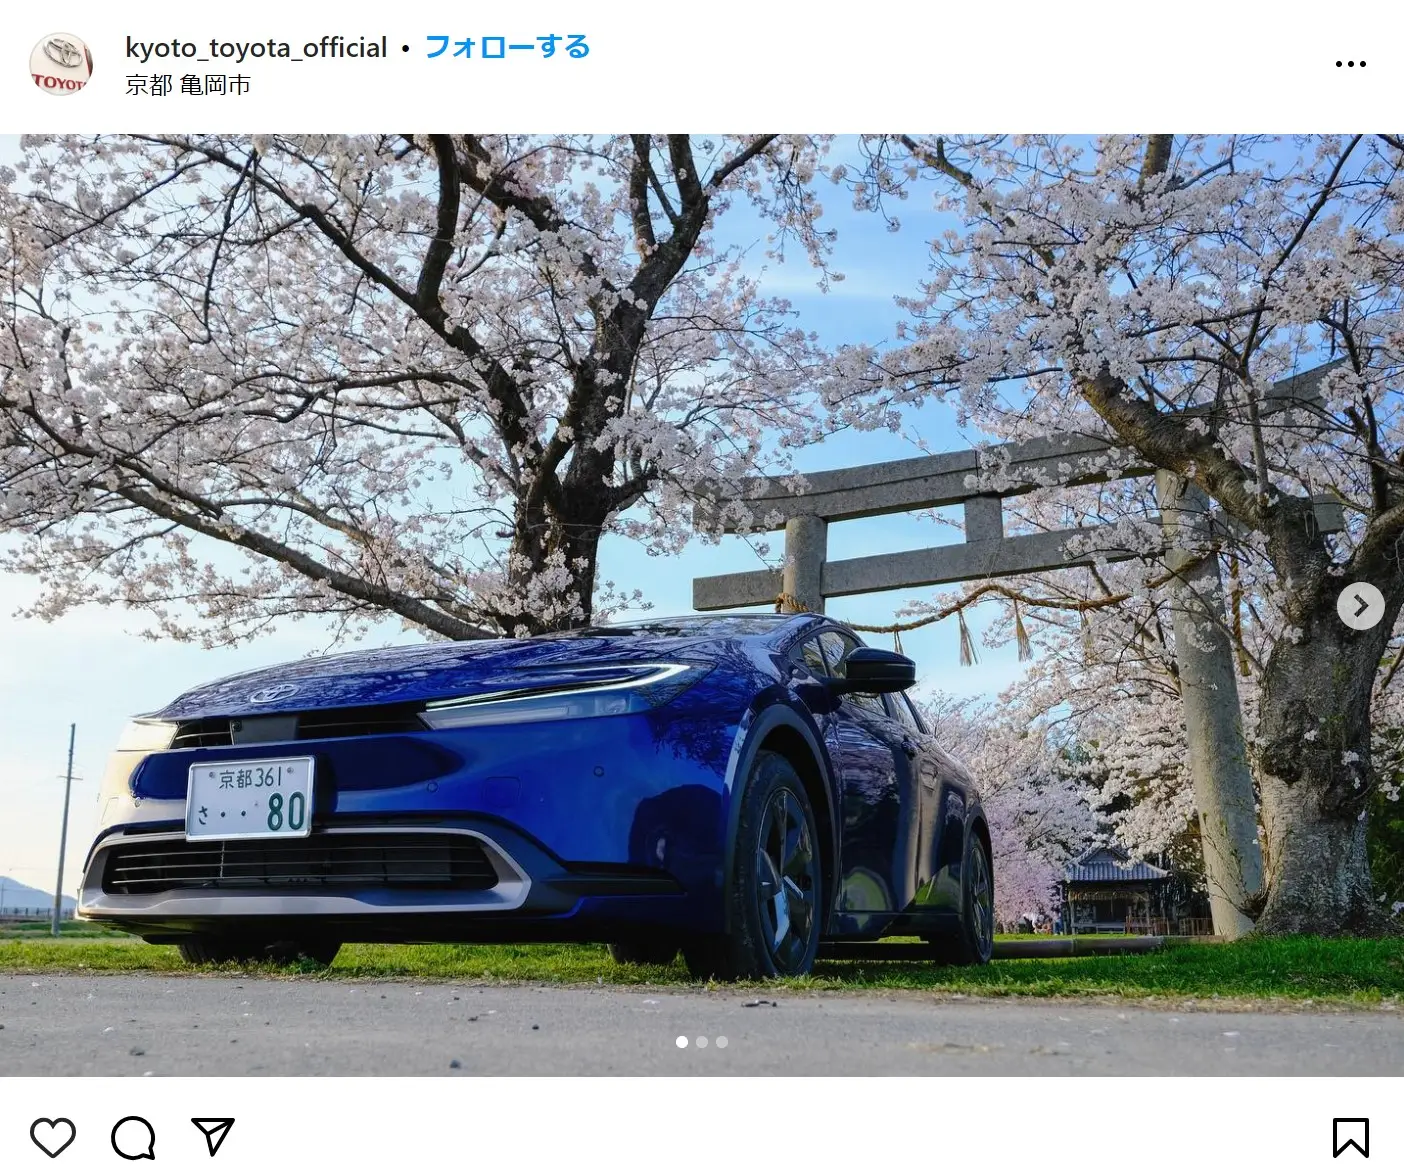 Instagram（@kyoto_toyota_official）